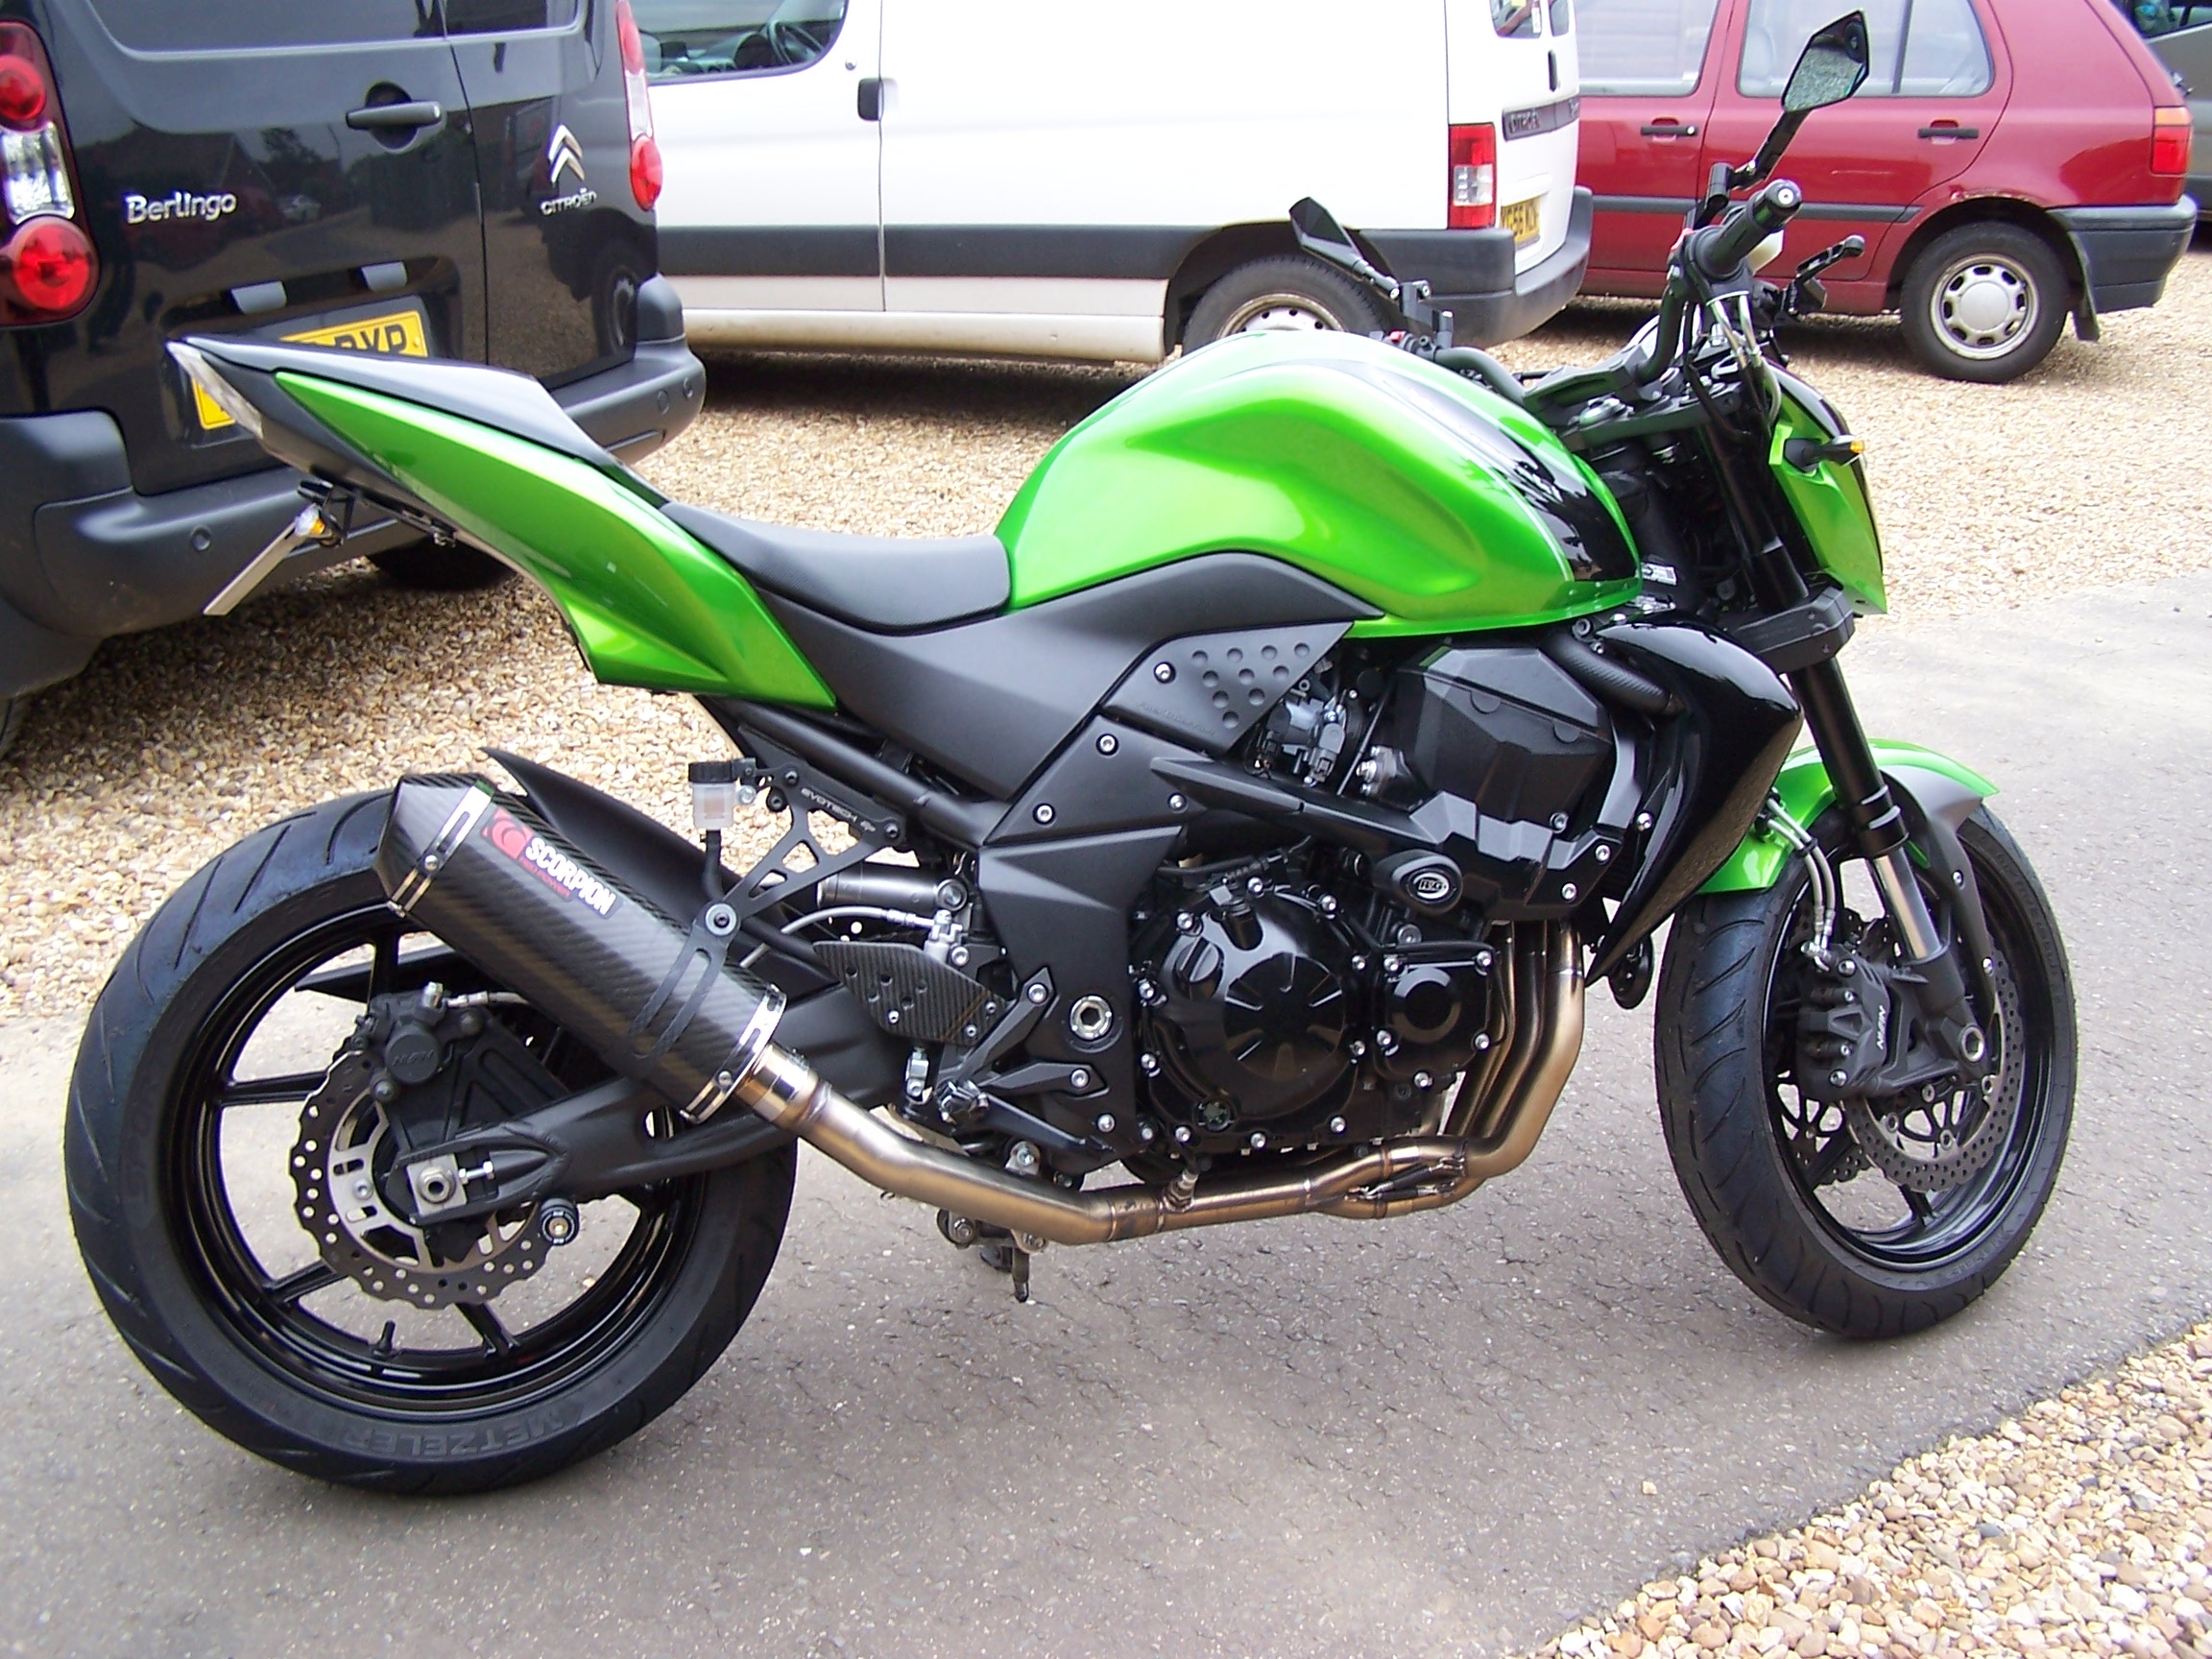 2012 Kawasaki Z750R: Power Commander PC V fit and setup to suit Stage 2 air filter lid